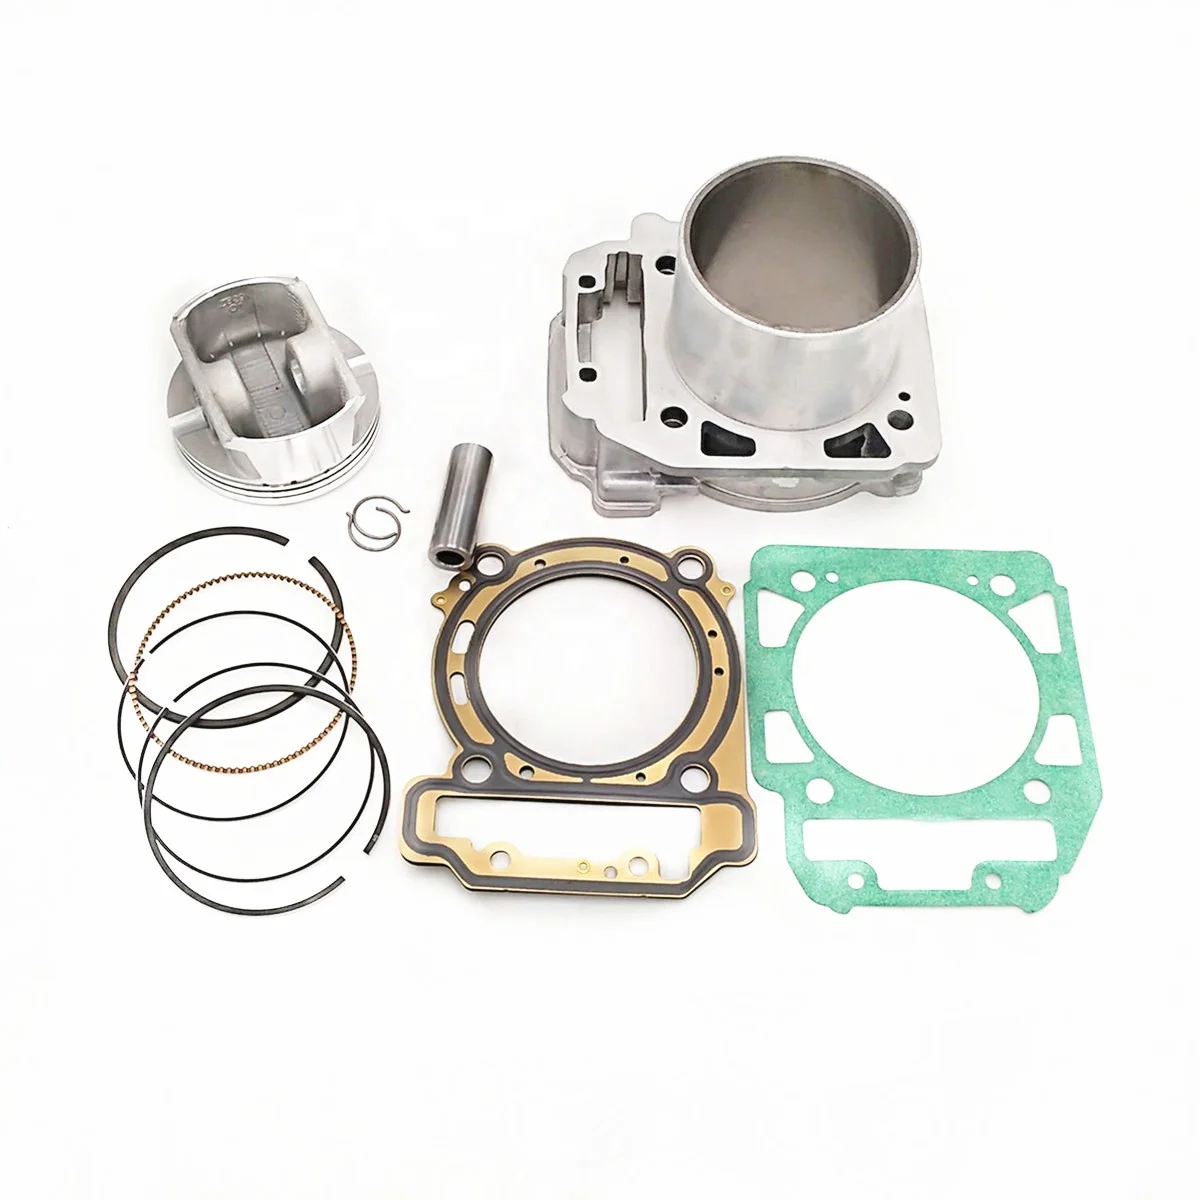 

ATV Cylinder , Piston, Gasket Kit for ODES/Liangzi 800 cc Dune Buggy 4x4 Lz Engine Spare Parts